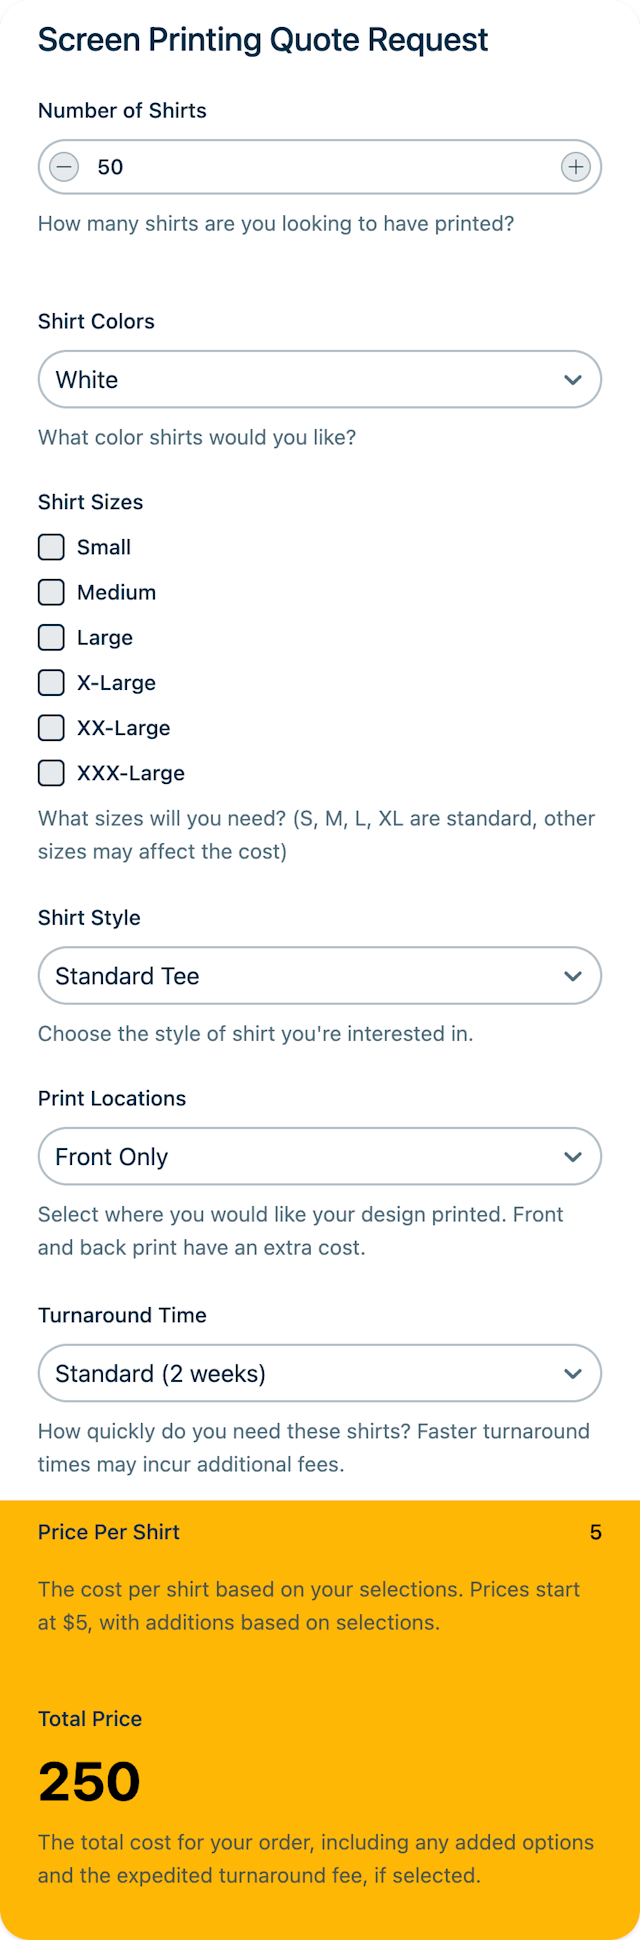 Screen Printing Quote Request template - Made by ActiveCalculator